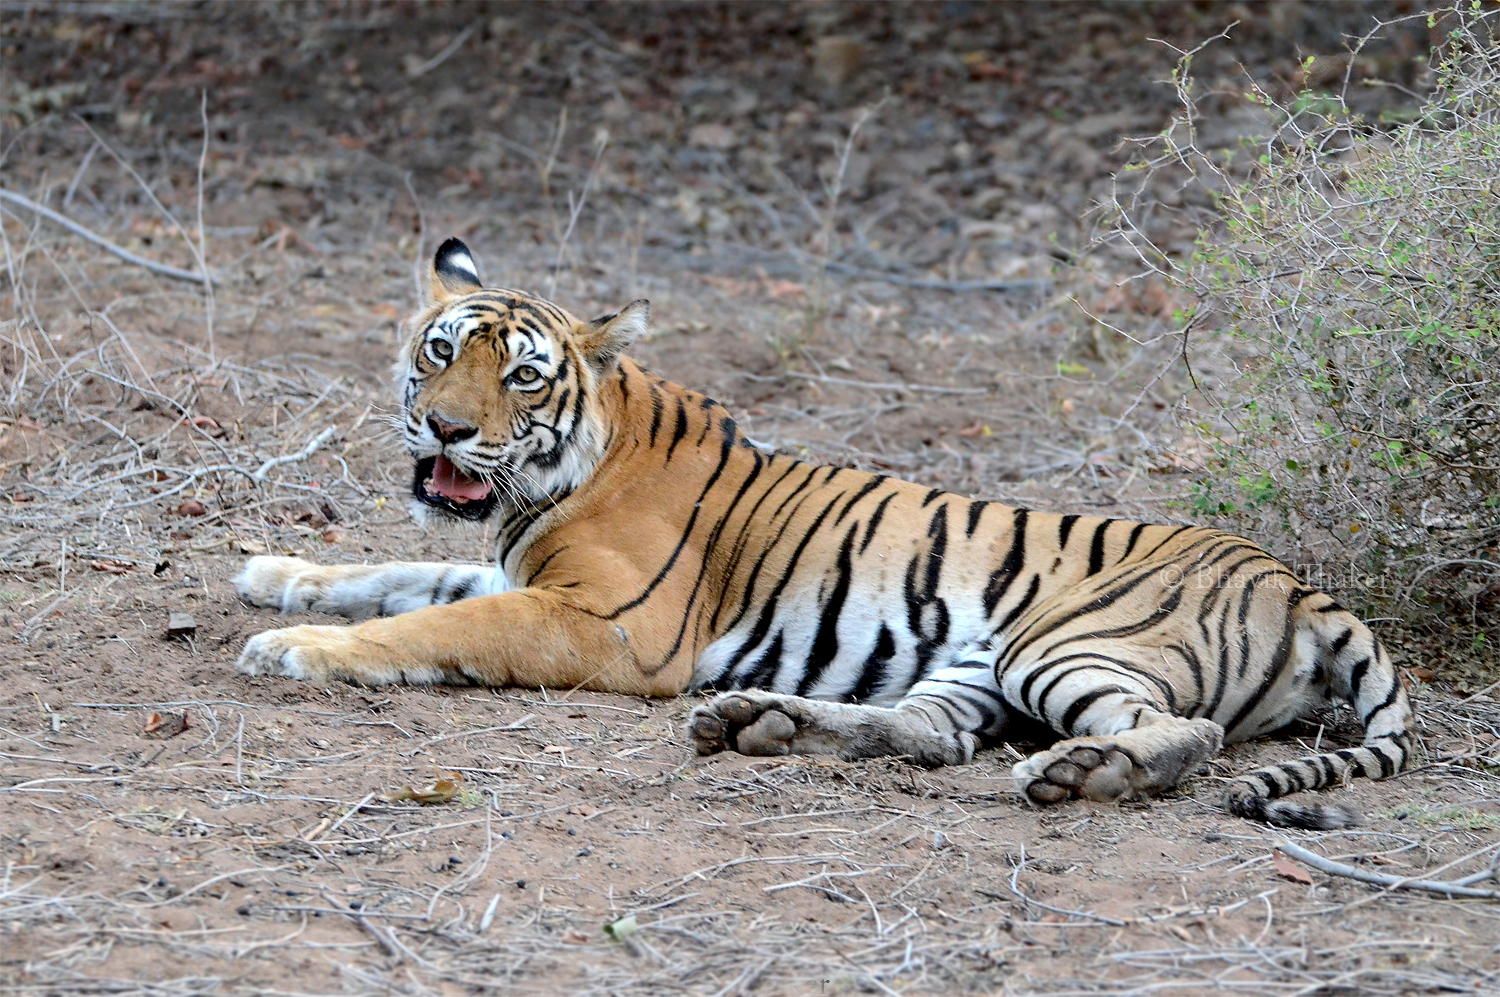 India saw record tiger deaths this year: Data